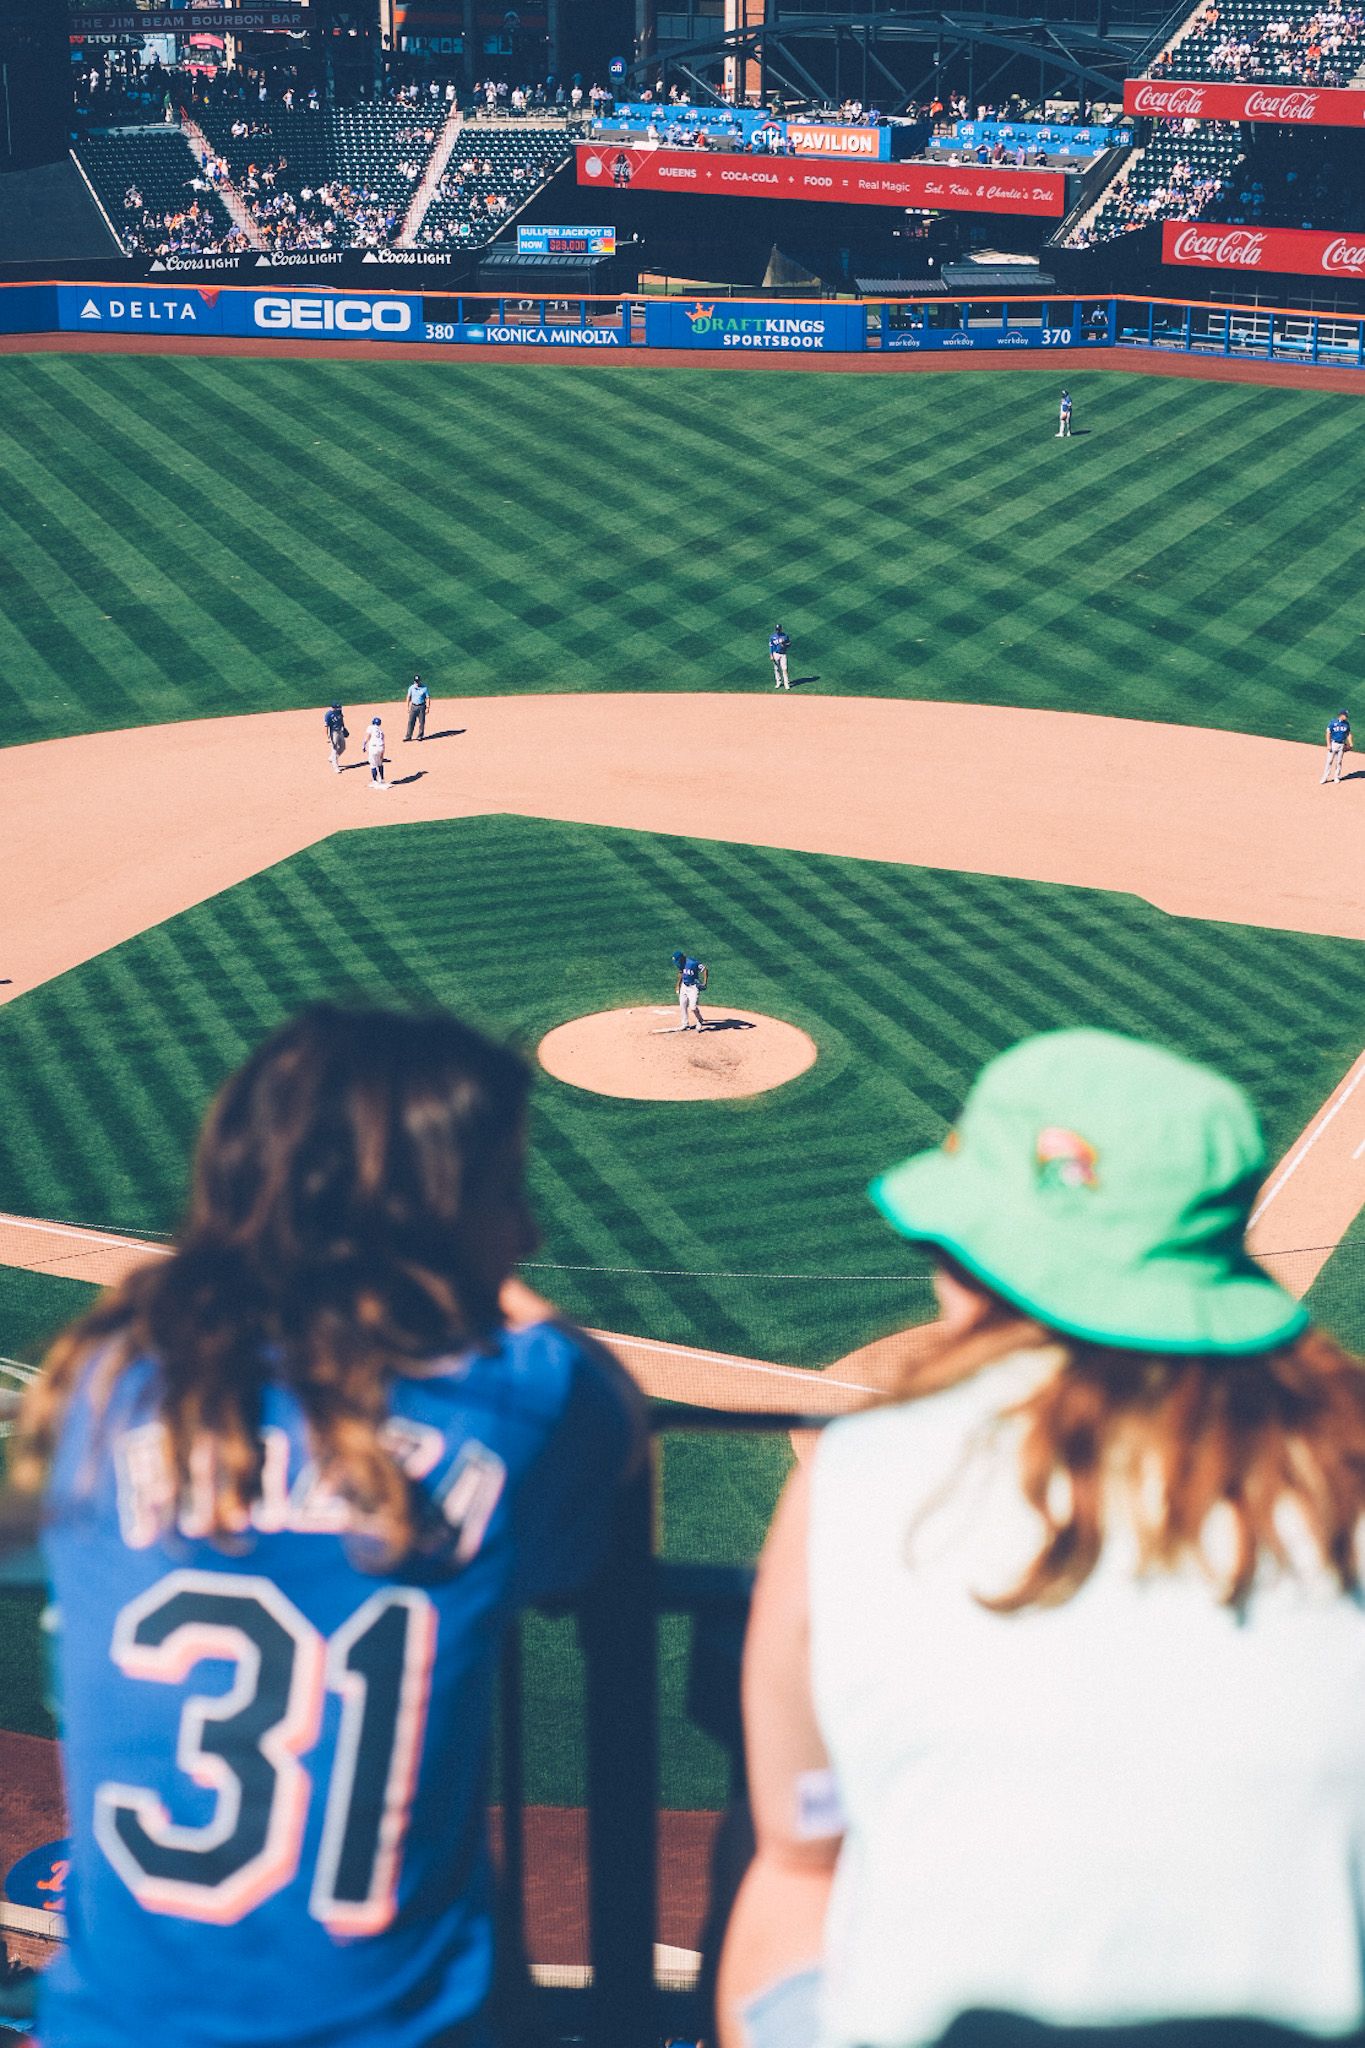 The backs of two women at a baseball game frame the pitcher’s mound of a major league baseball field on a sunny day.